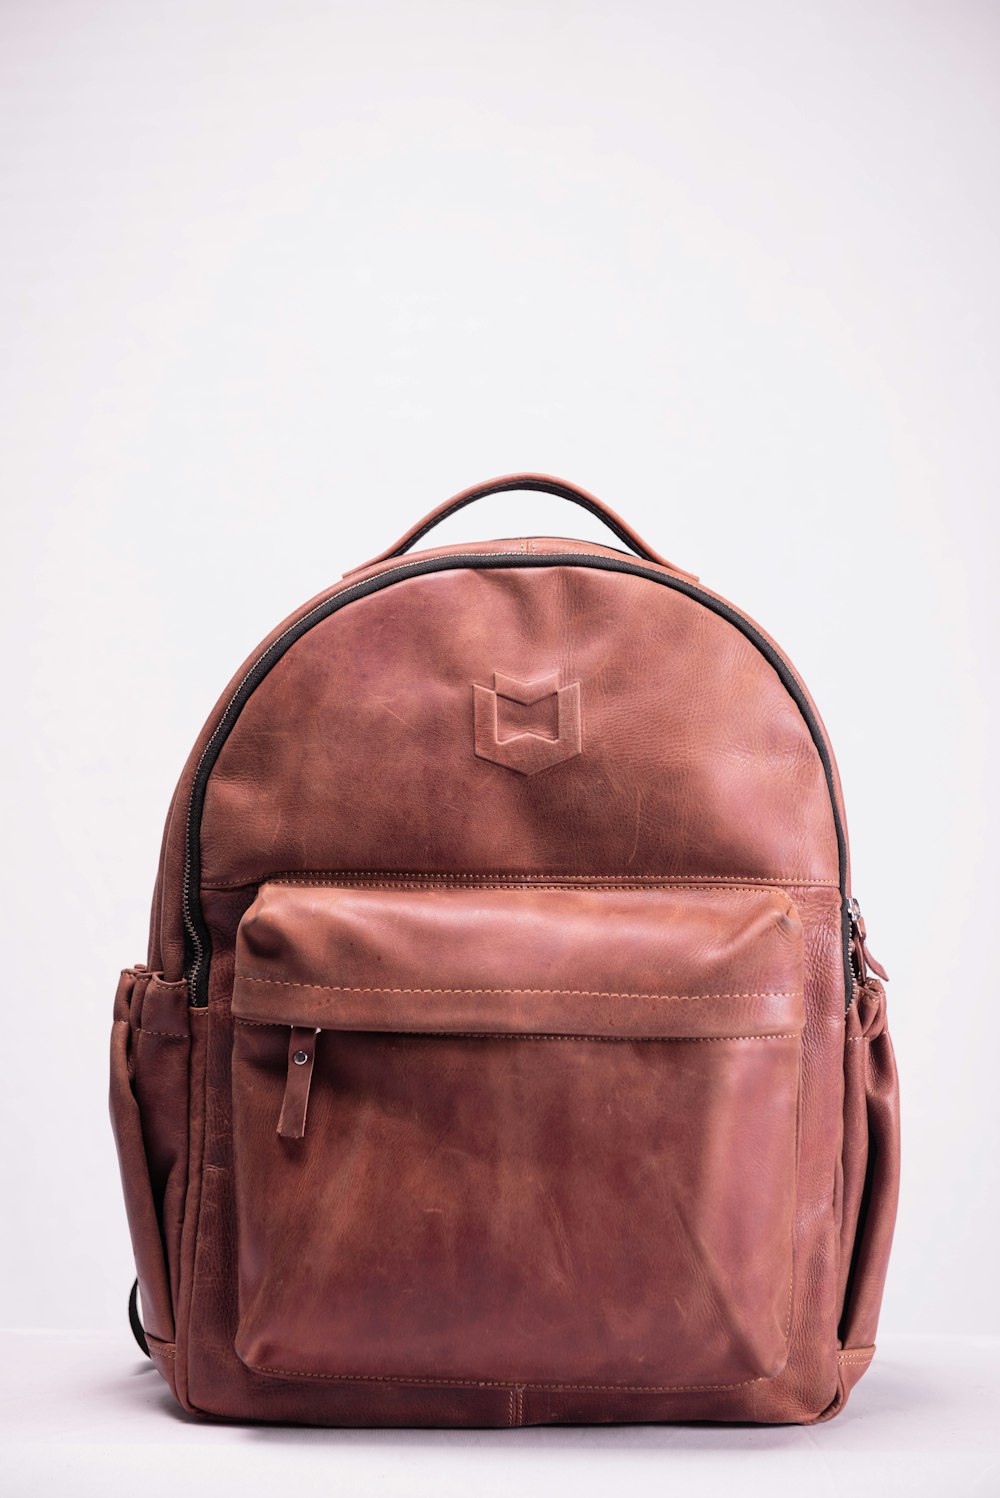 brown leather backpack on white surface